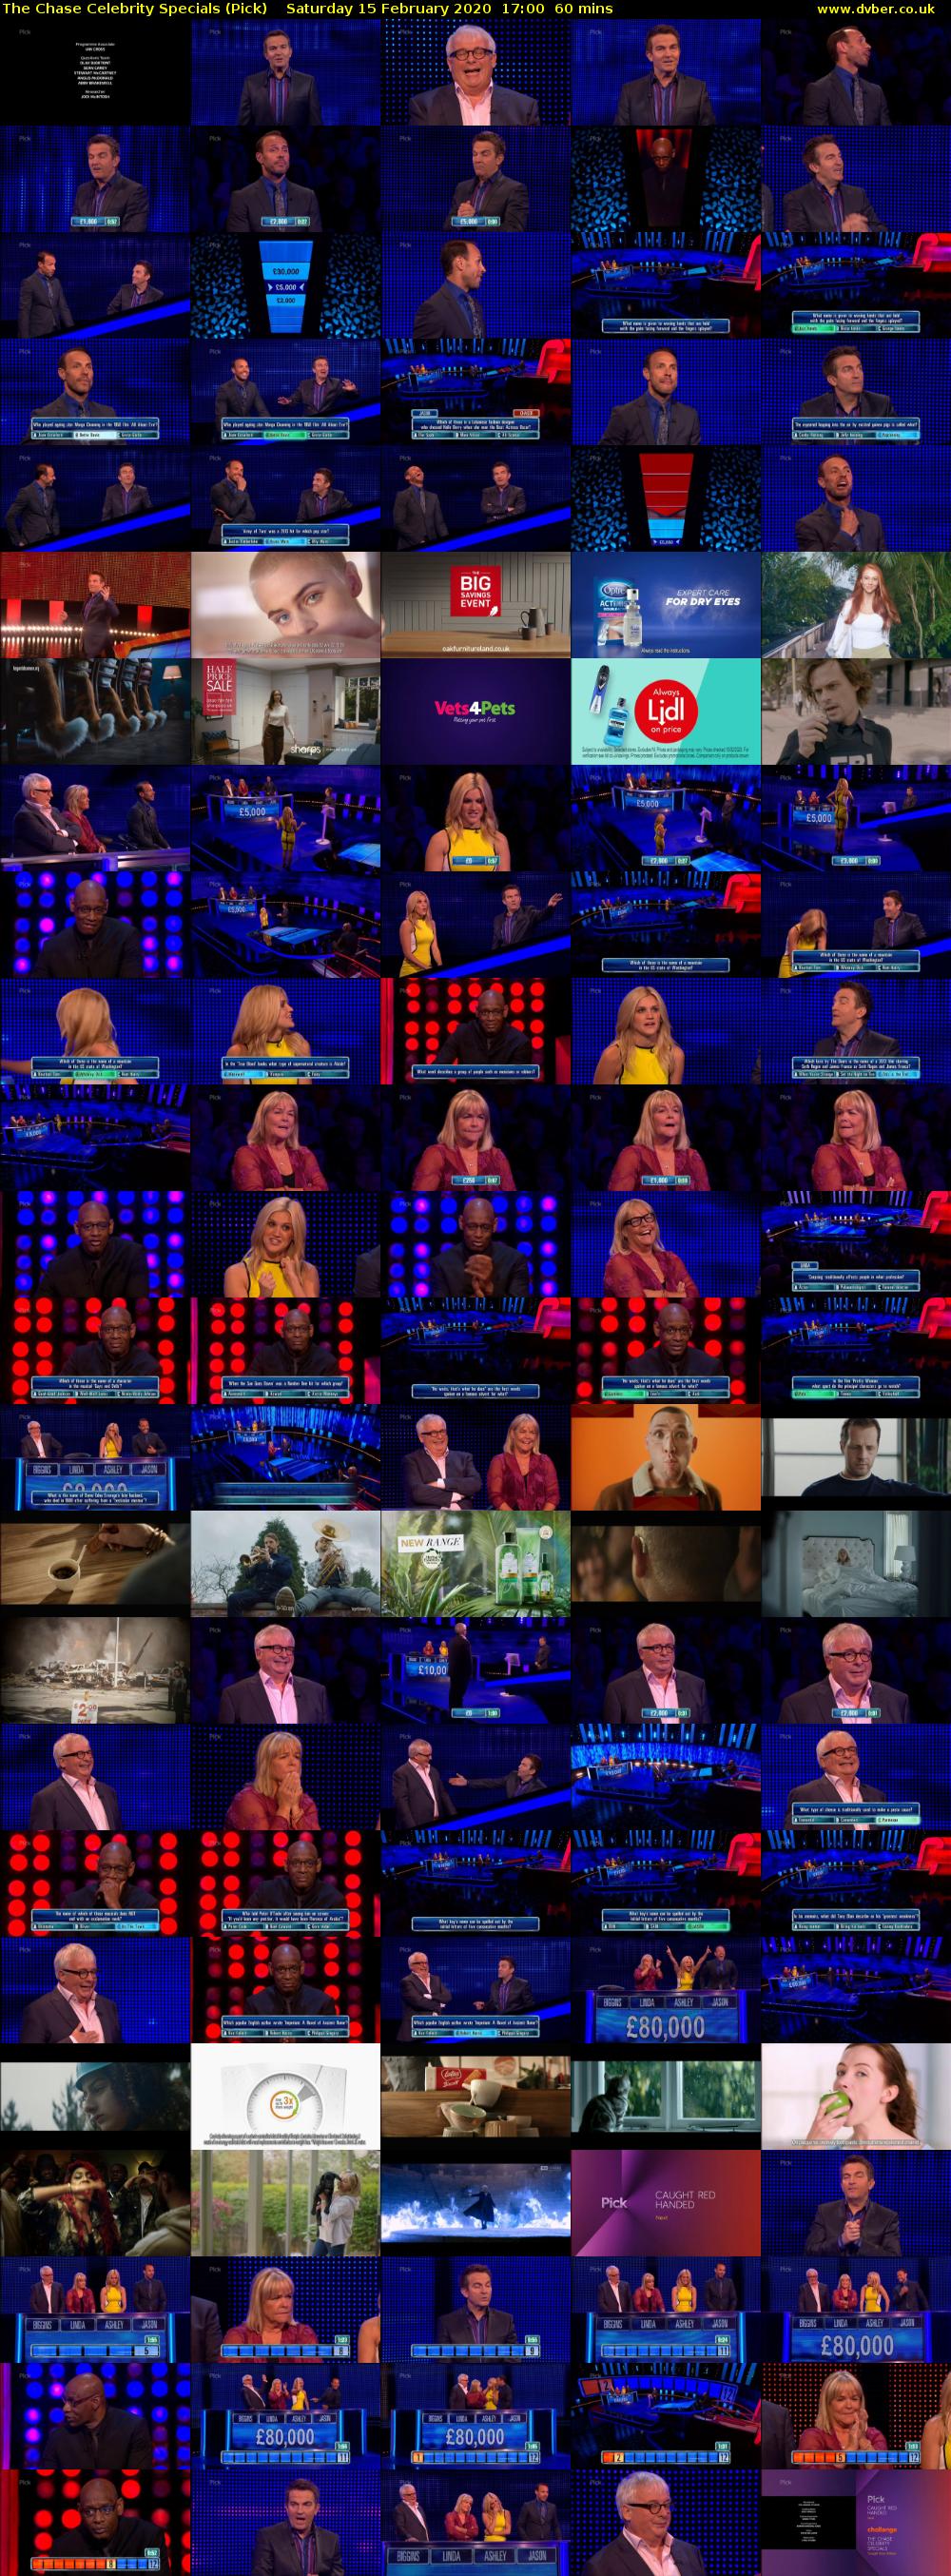 The Chase Celebrity Specials (Pick) Saturday 15 February 2020 17:00 - 18:00